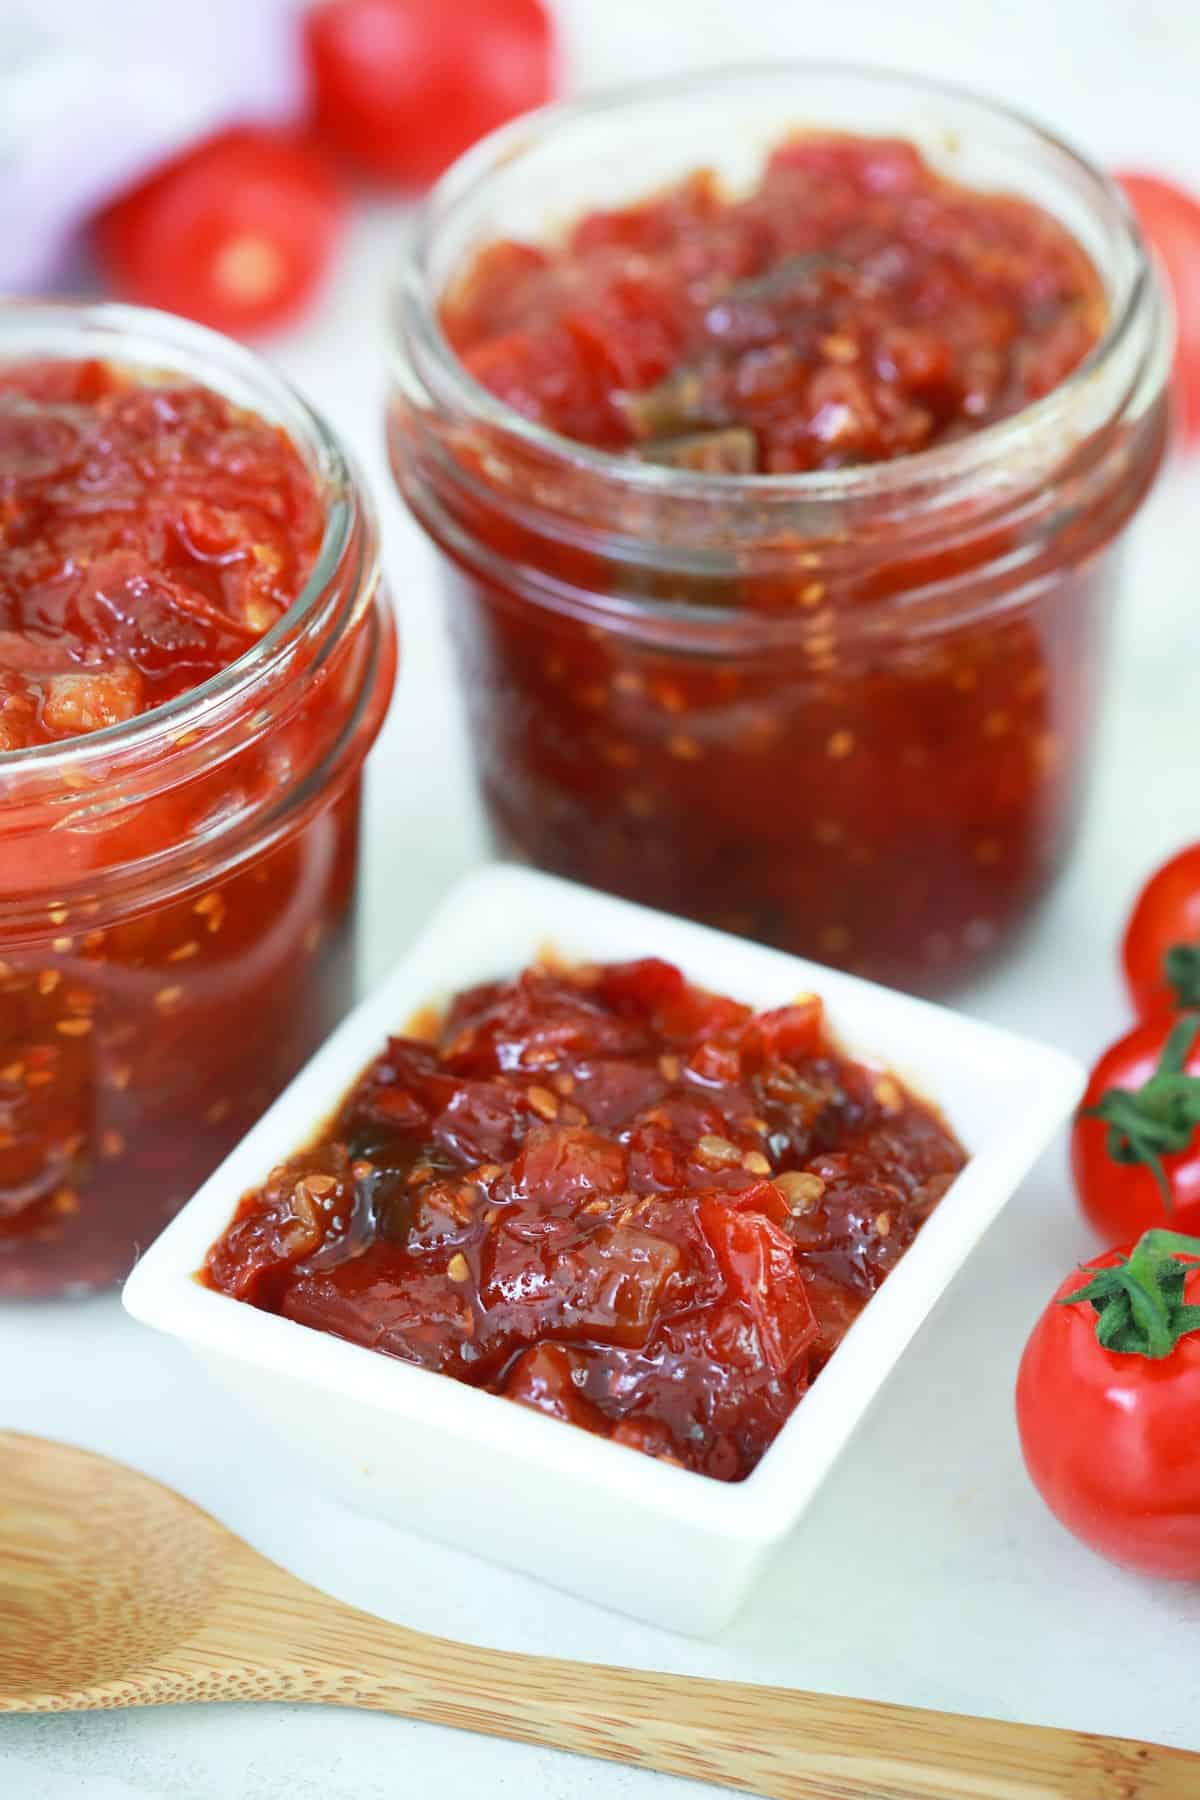 Tomato jam in jars and a small white dish